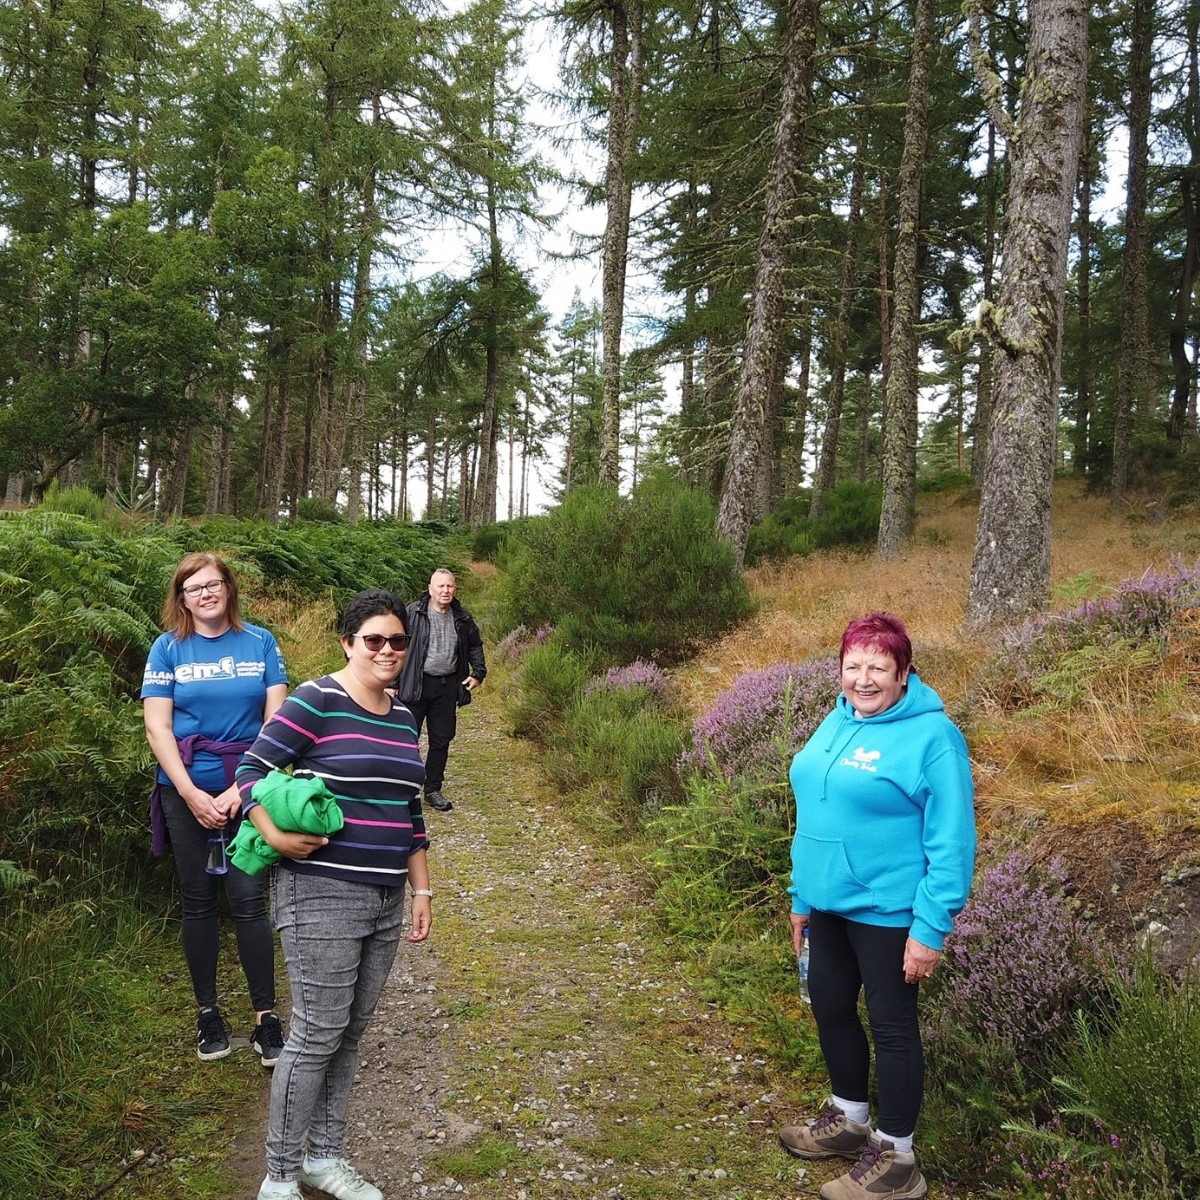 Clarity Walk takes big step forward thanks to Cairn Community Fund